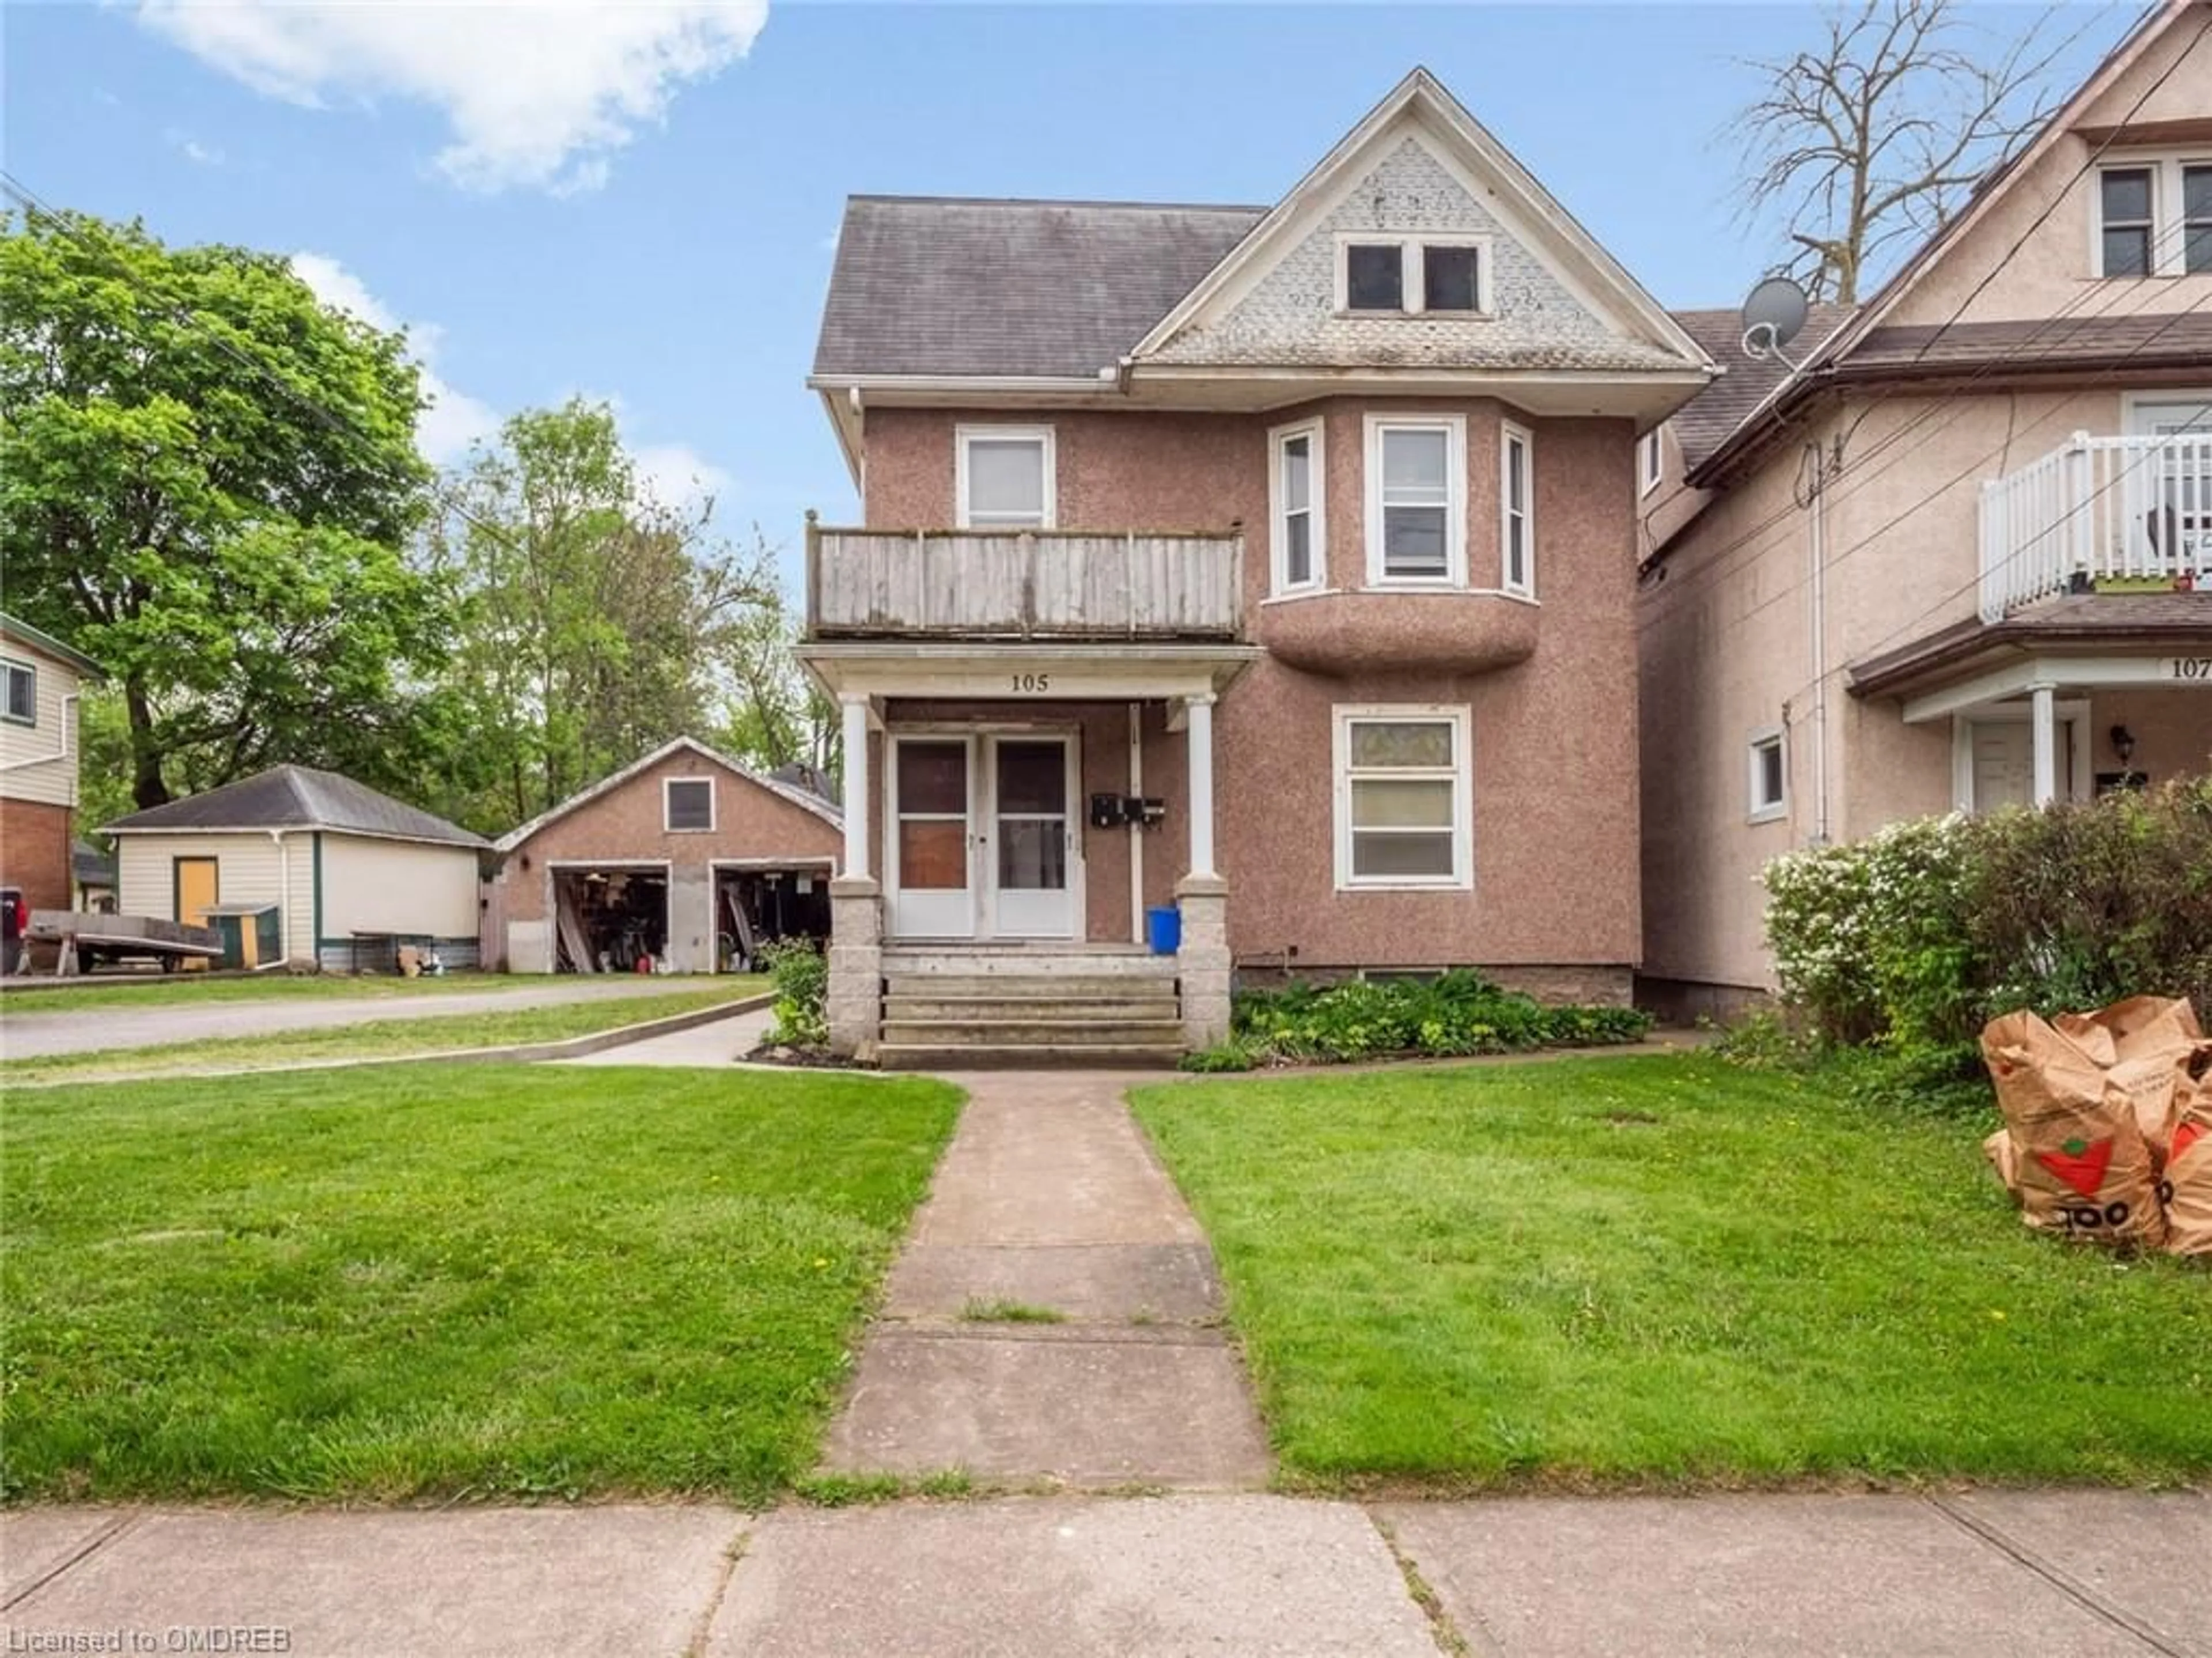 Frontside or backside of a home for 105 Maple Ave, Welland Ontario L3C 5G2